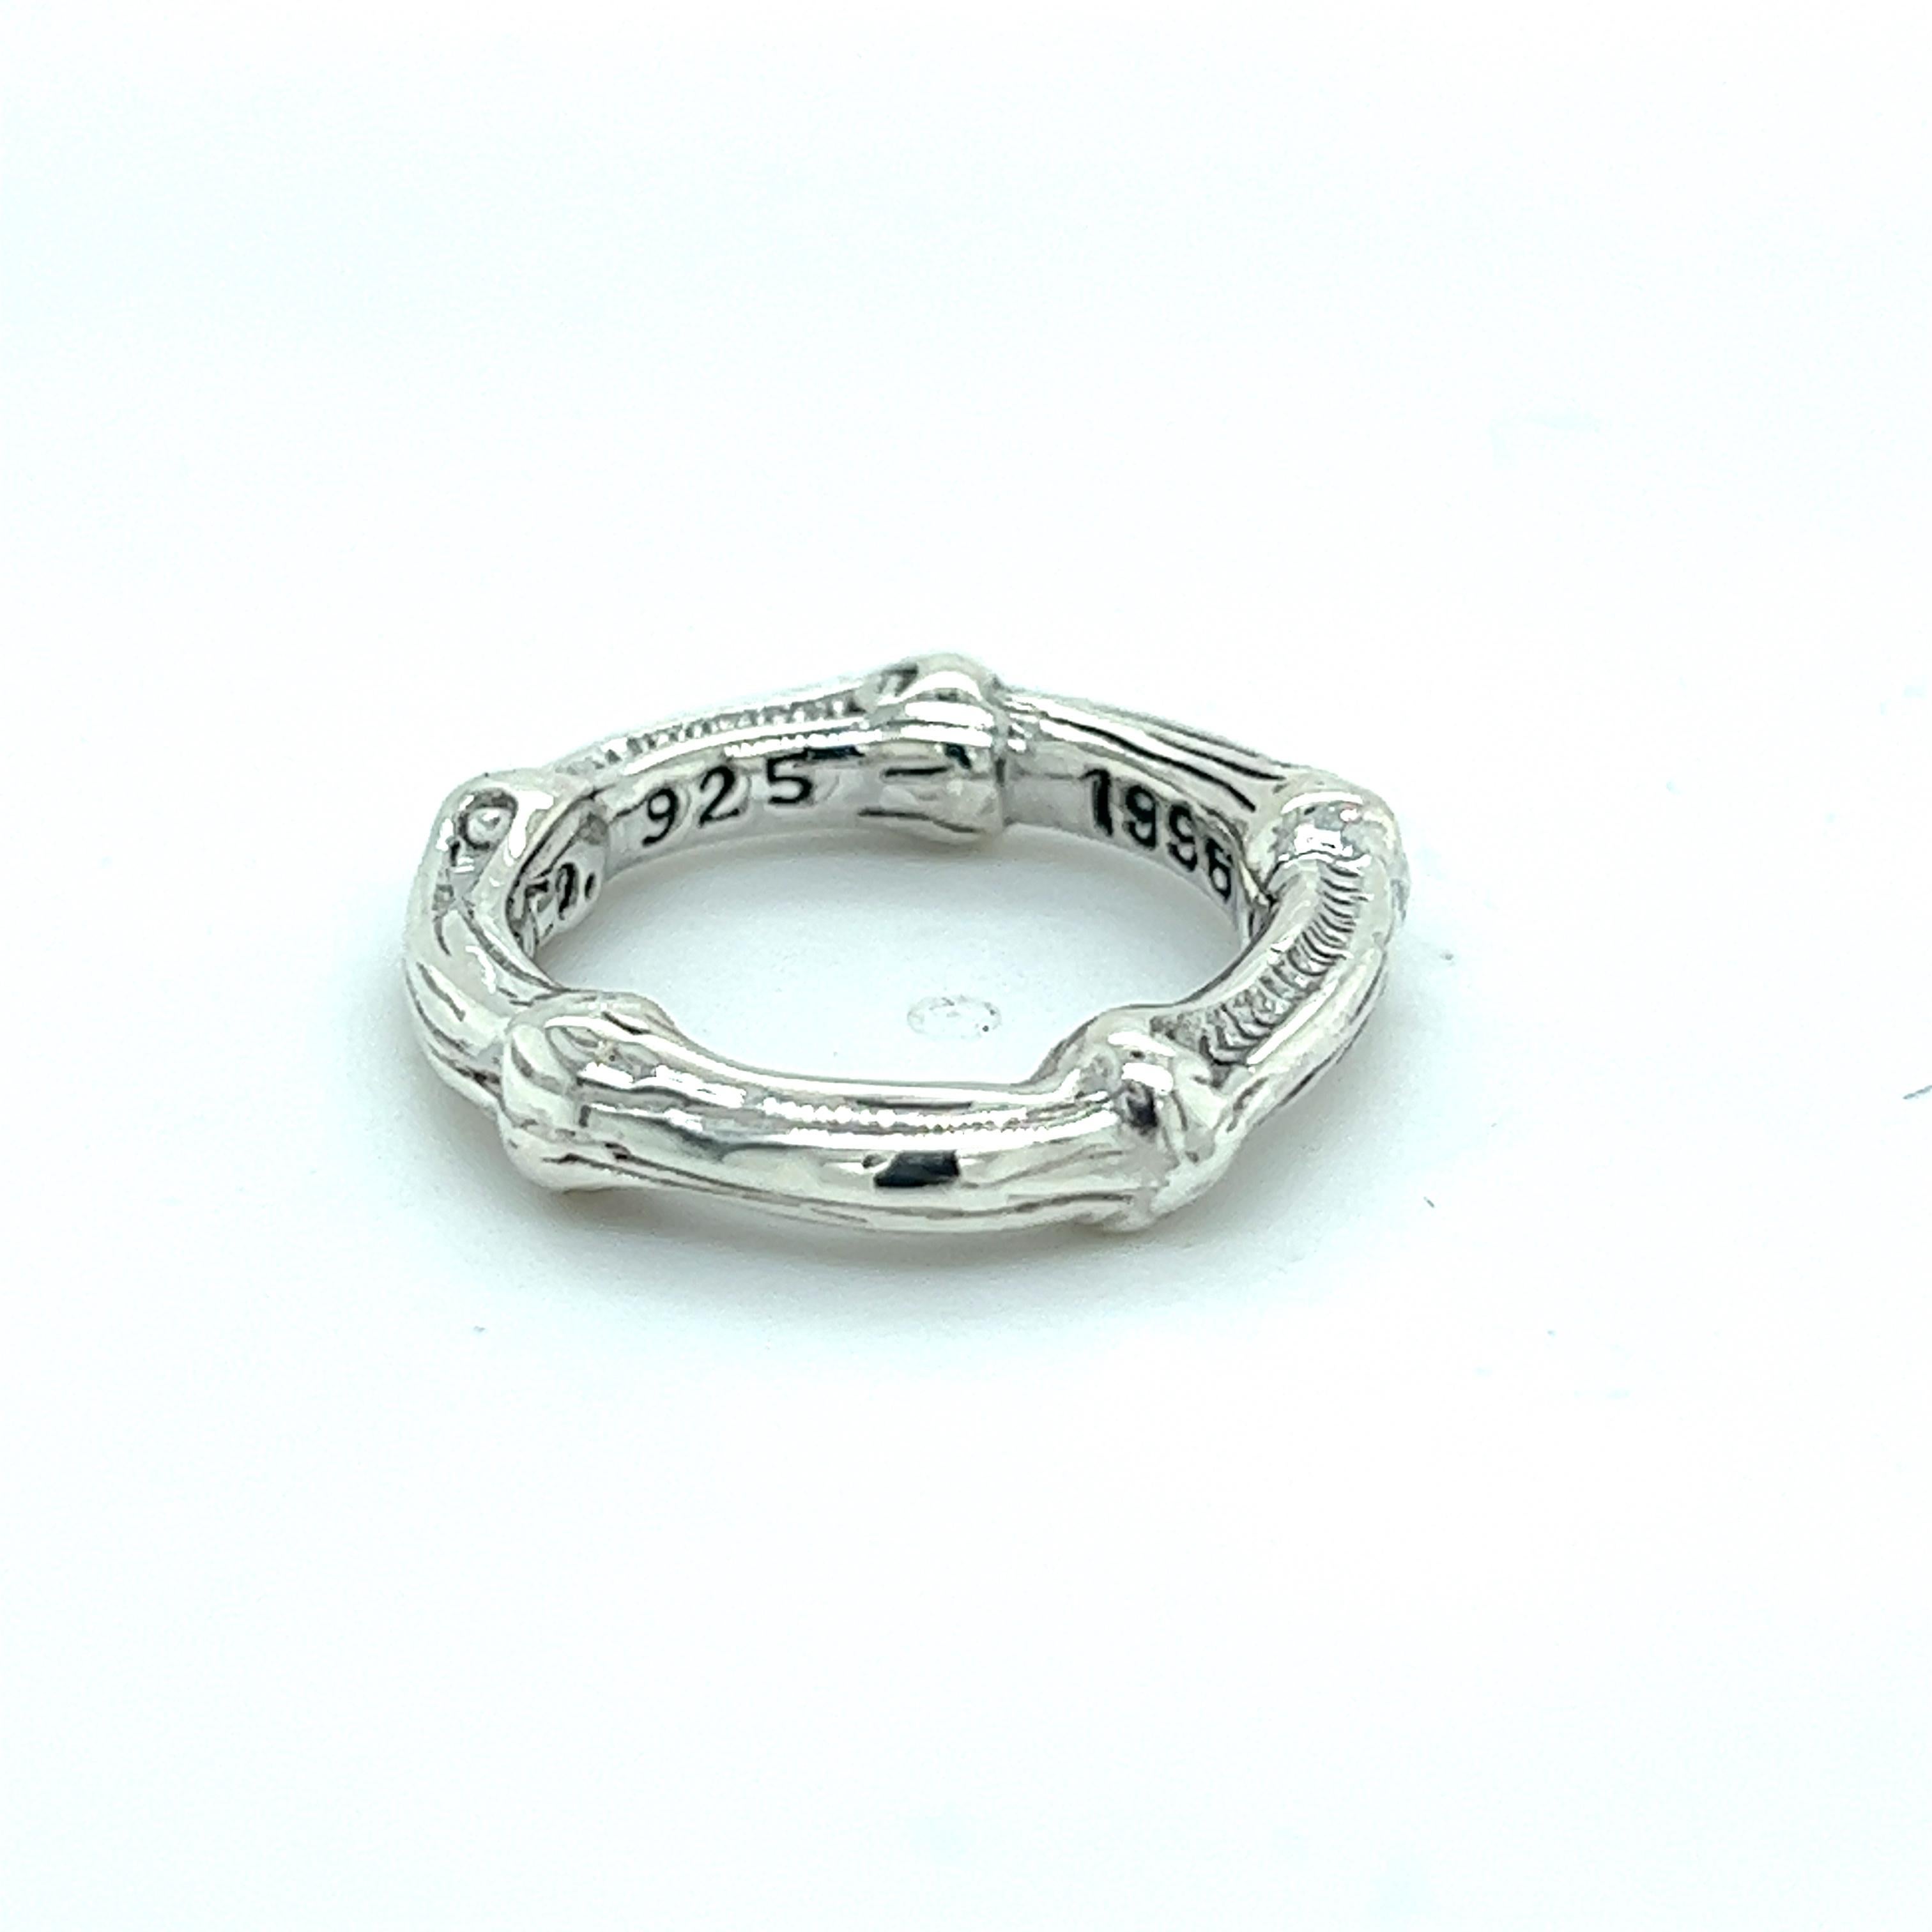 Authentic Tiffany & Co Estate Bamboo Ring Size 4 Sterling Silver 4.5 mm TIF452

TRUSTED SELLER SINCE 2002

PLEASE SEE OUR HUNDREDS OF POSITIVE FEEDBACKS FROM OUR CLIENTS!!

FREE SHIPPING

DETAILS
Style: Bamboo
Ring Size: 4
Size: 4.5 mm
Metal: